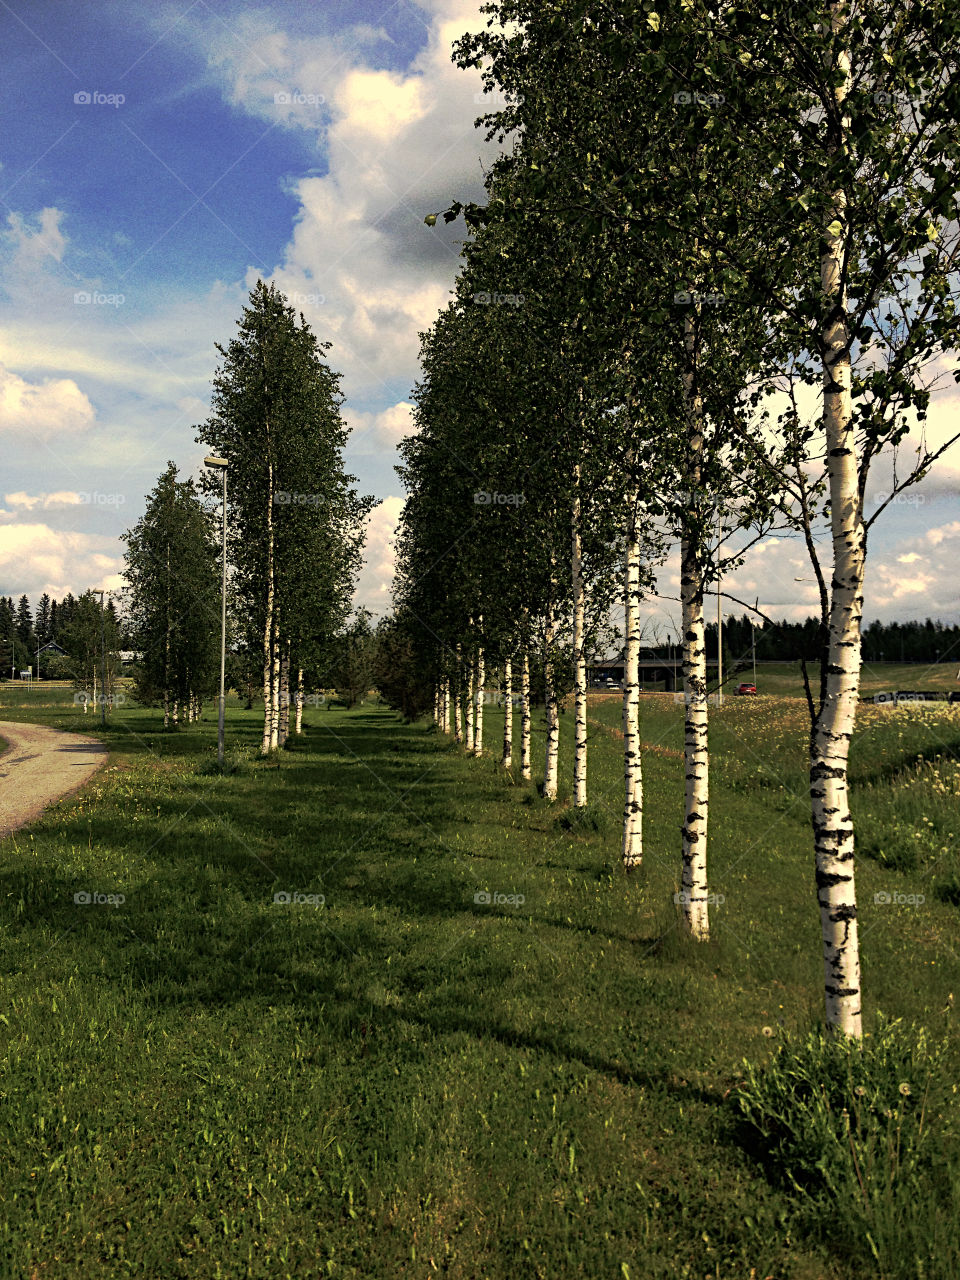 Birch alley. Young birch trees at summer